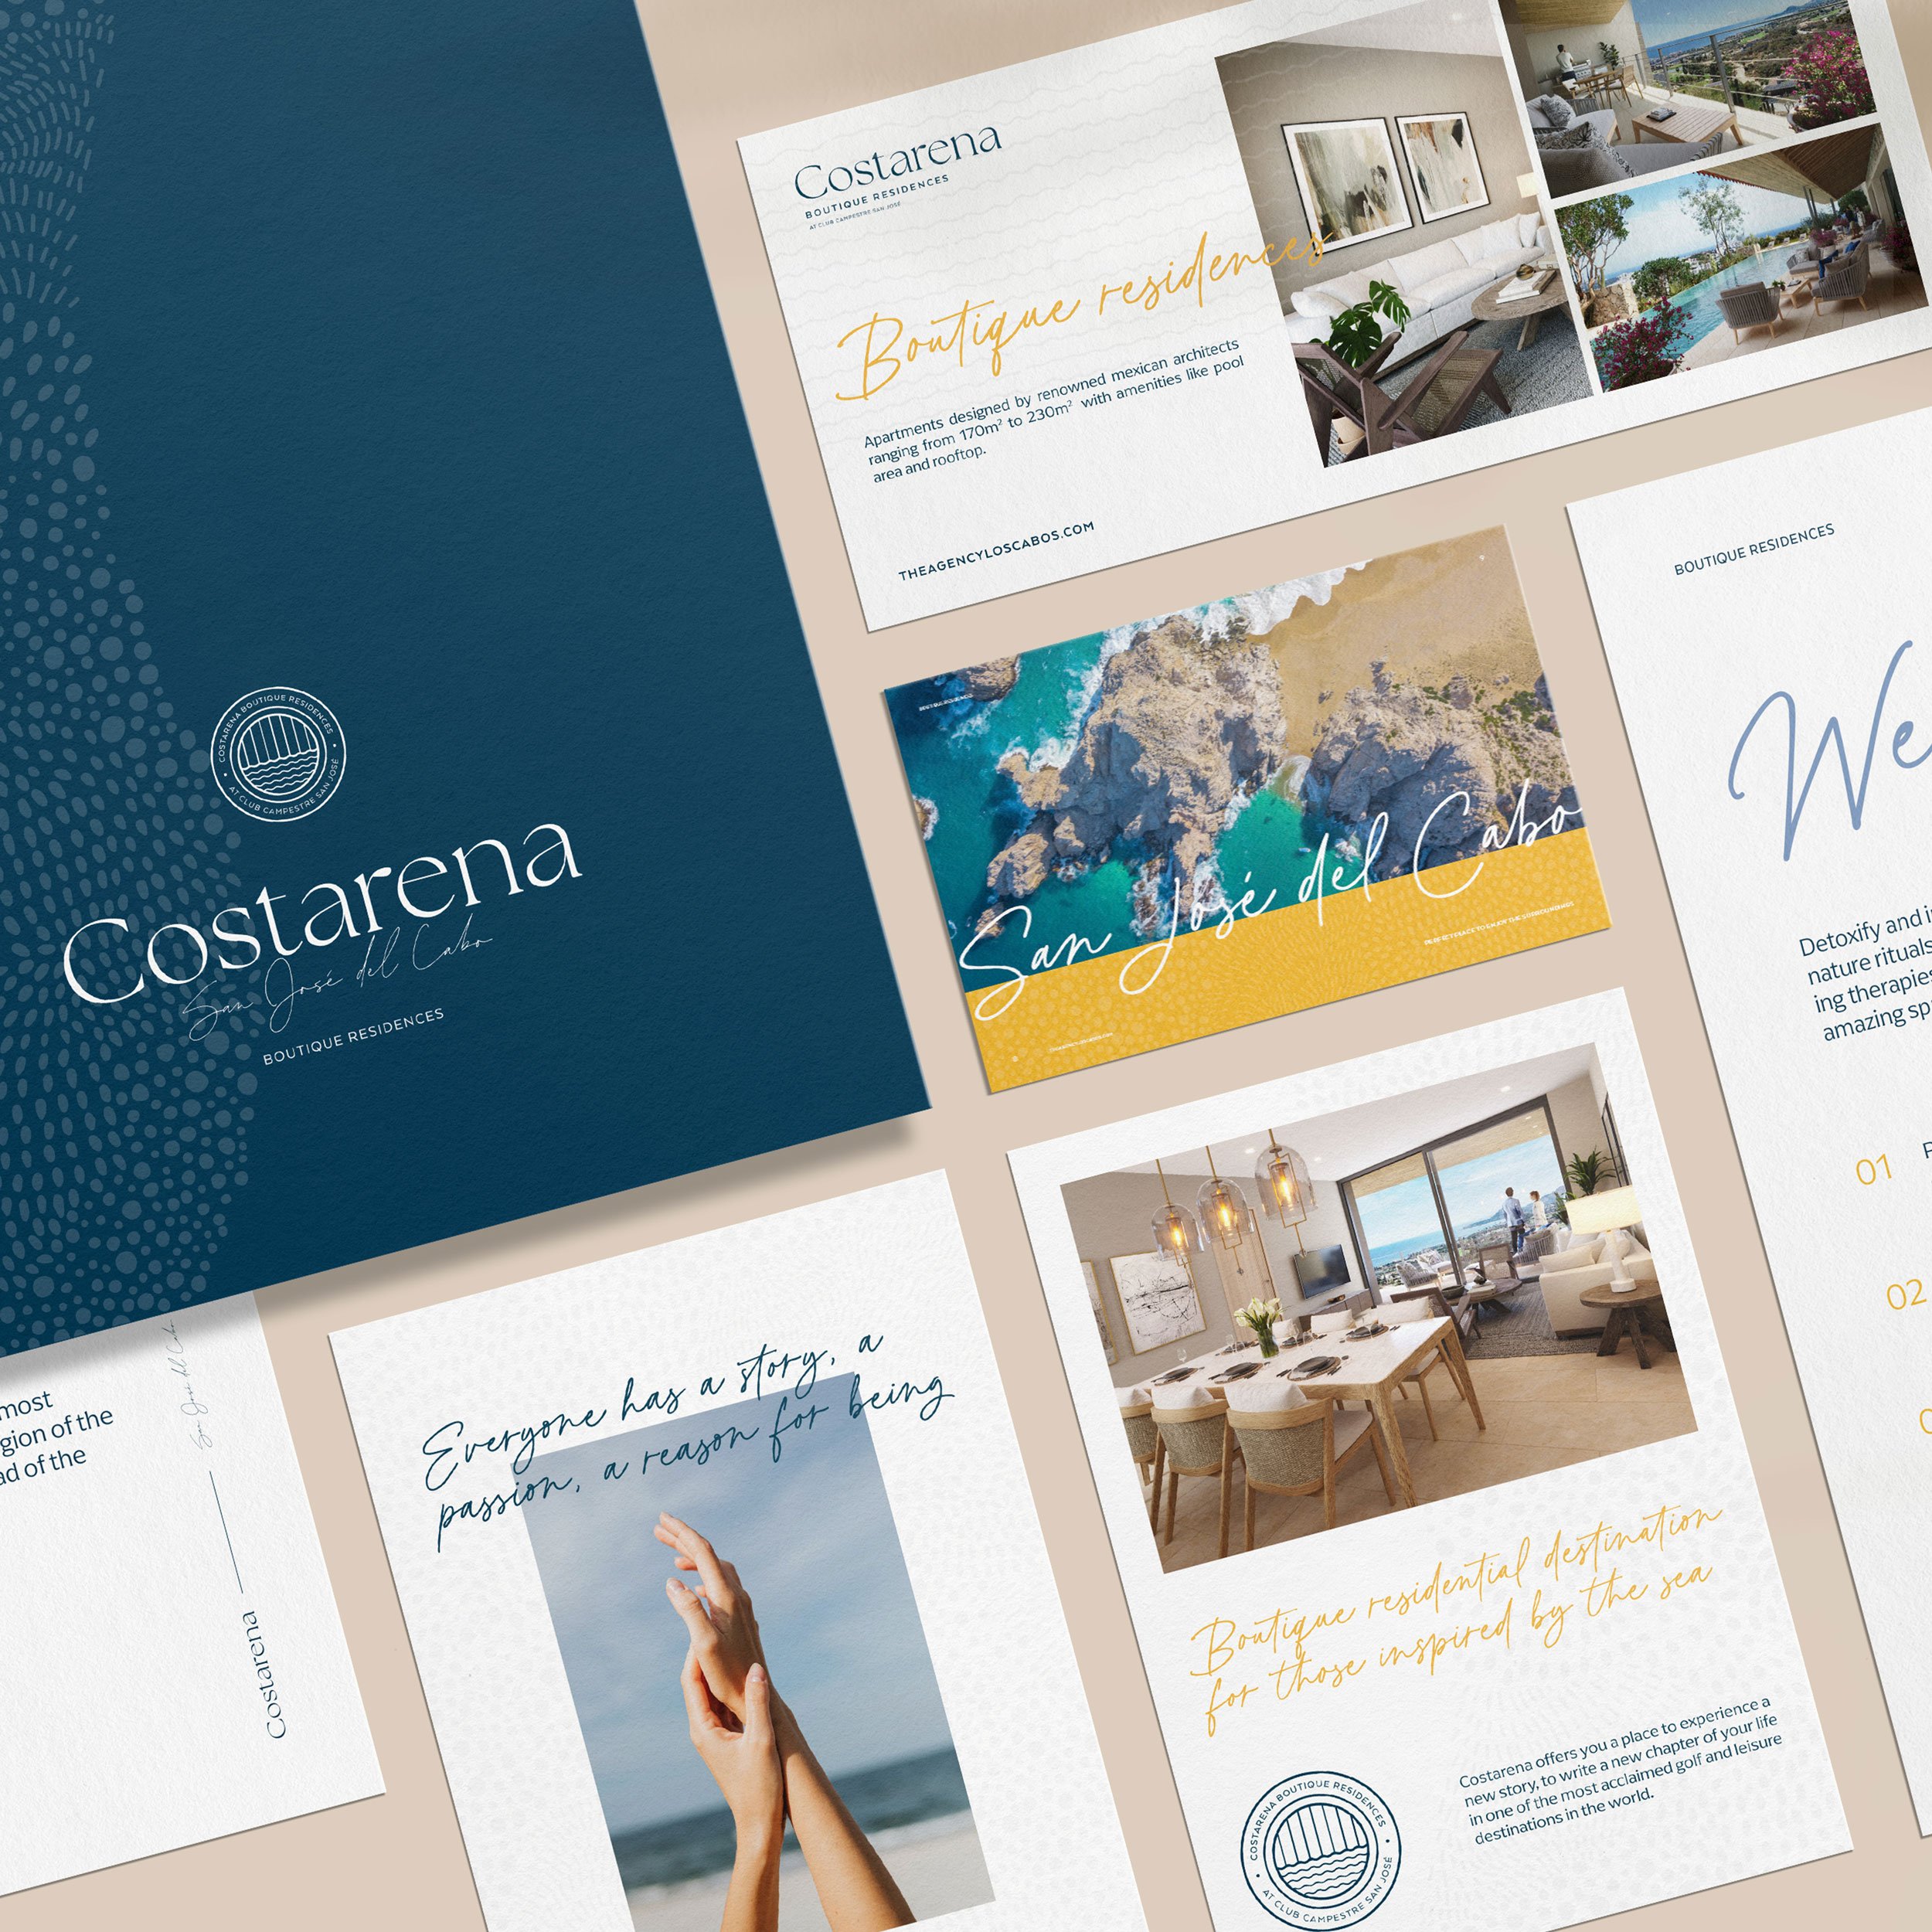 behagen-Branding-and-Marketing-for-Real-Estate-Costarena-Los-Cabos-Cover.jpg